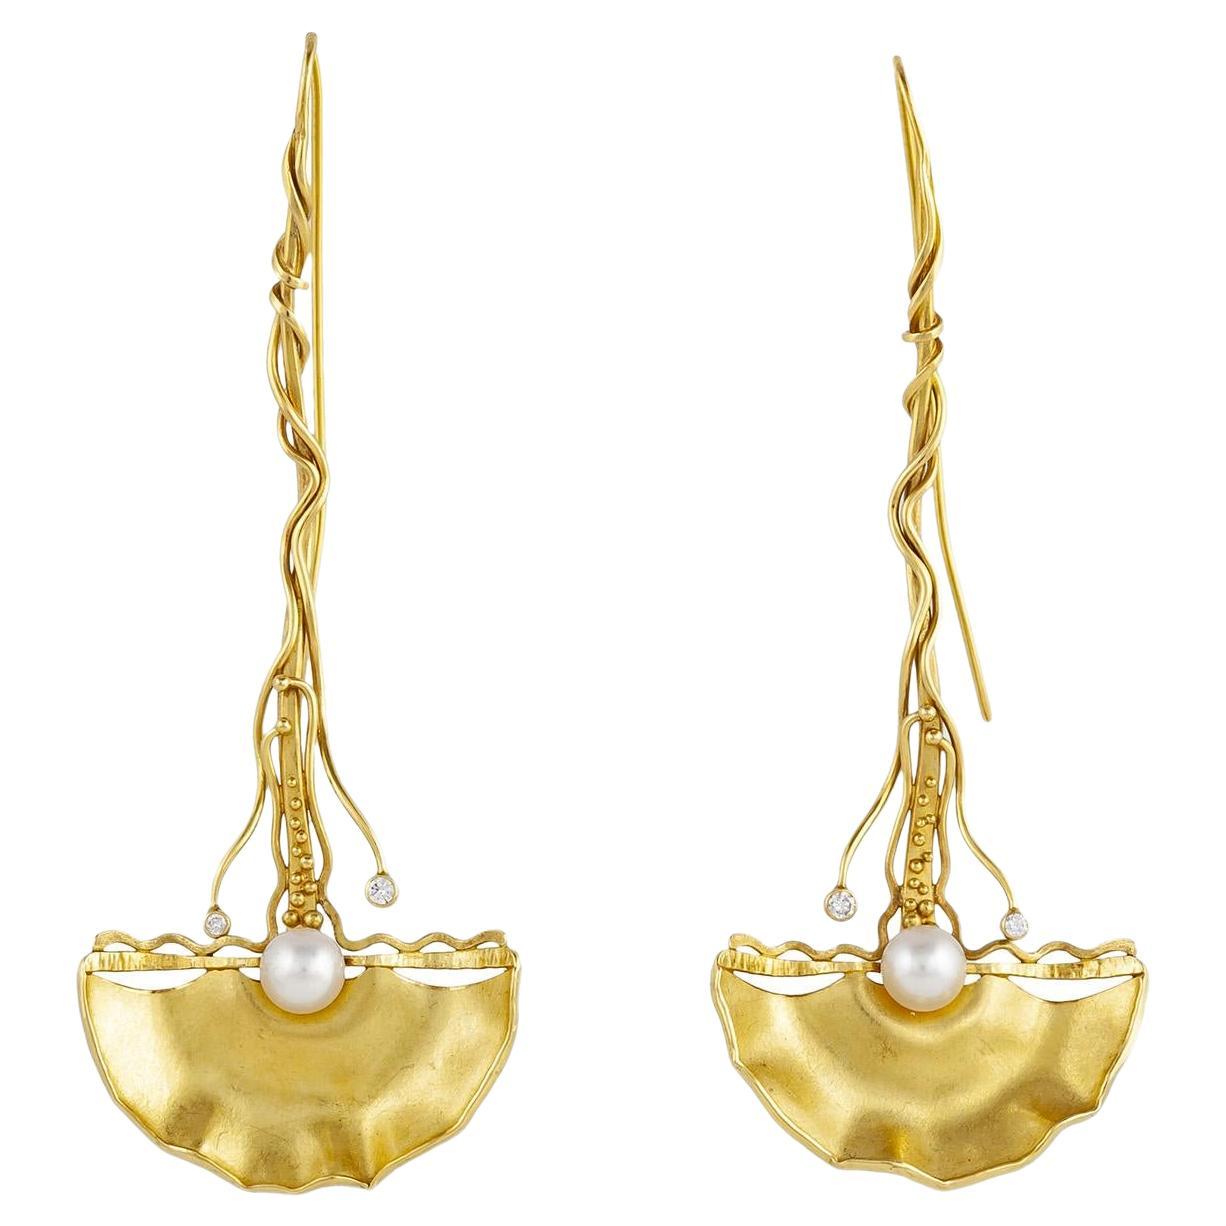 Vintage 1990s Gold Ginkgo Dangle Earrings with Pearls and Diamonds